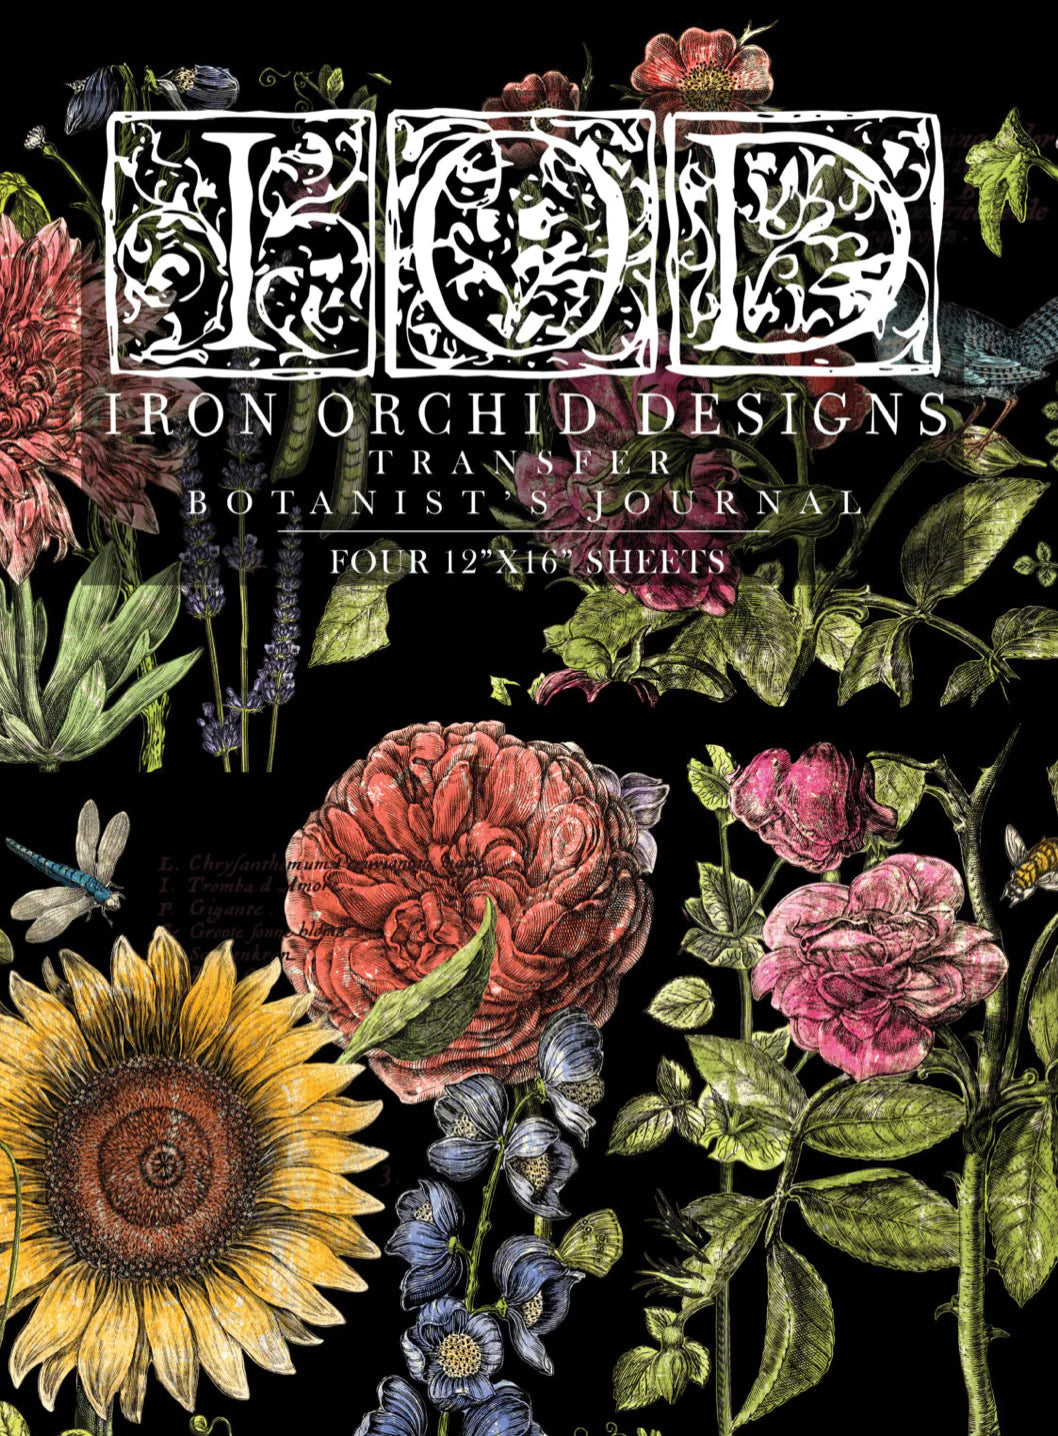 Iron Orchid Designs Transfers Botanist's Journal